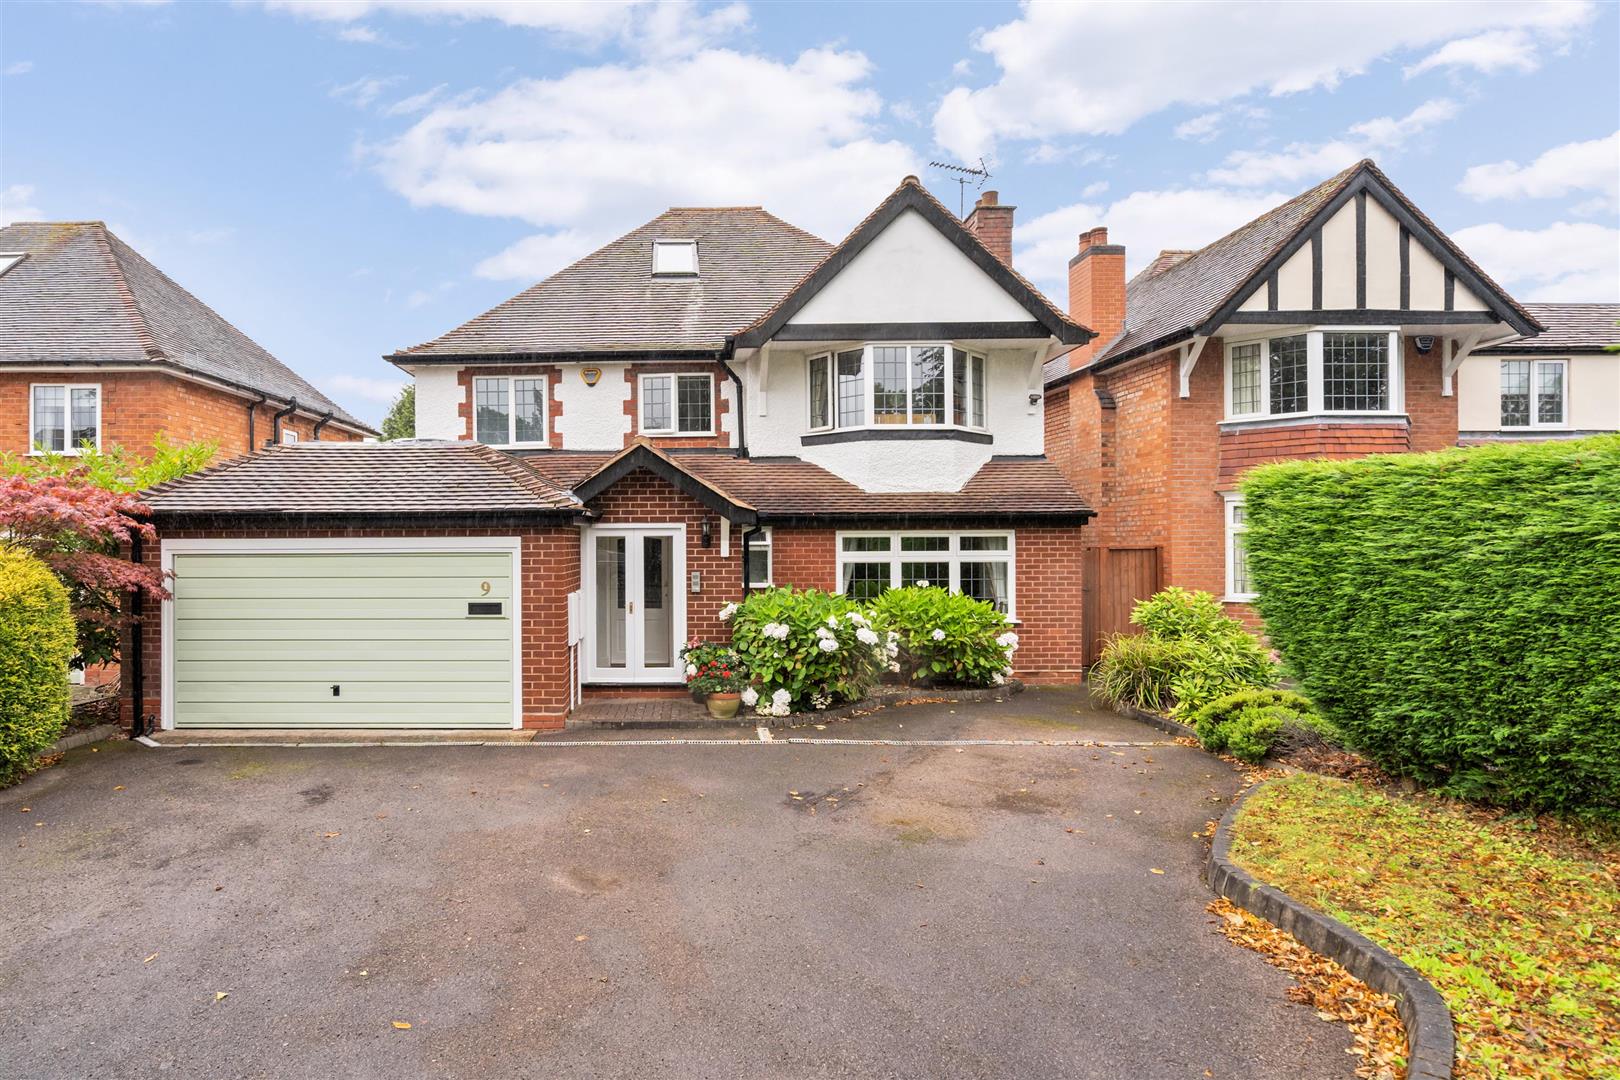 5 bed detached house for sale in Silhill Hall Road, Solihull  - Property Image 1